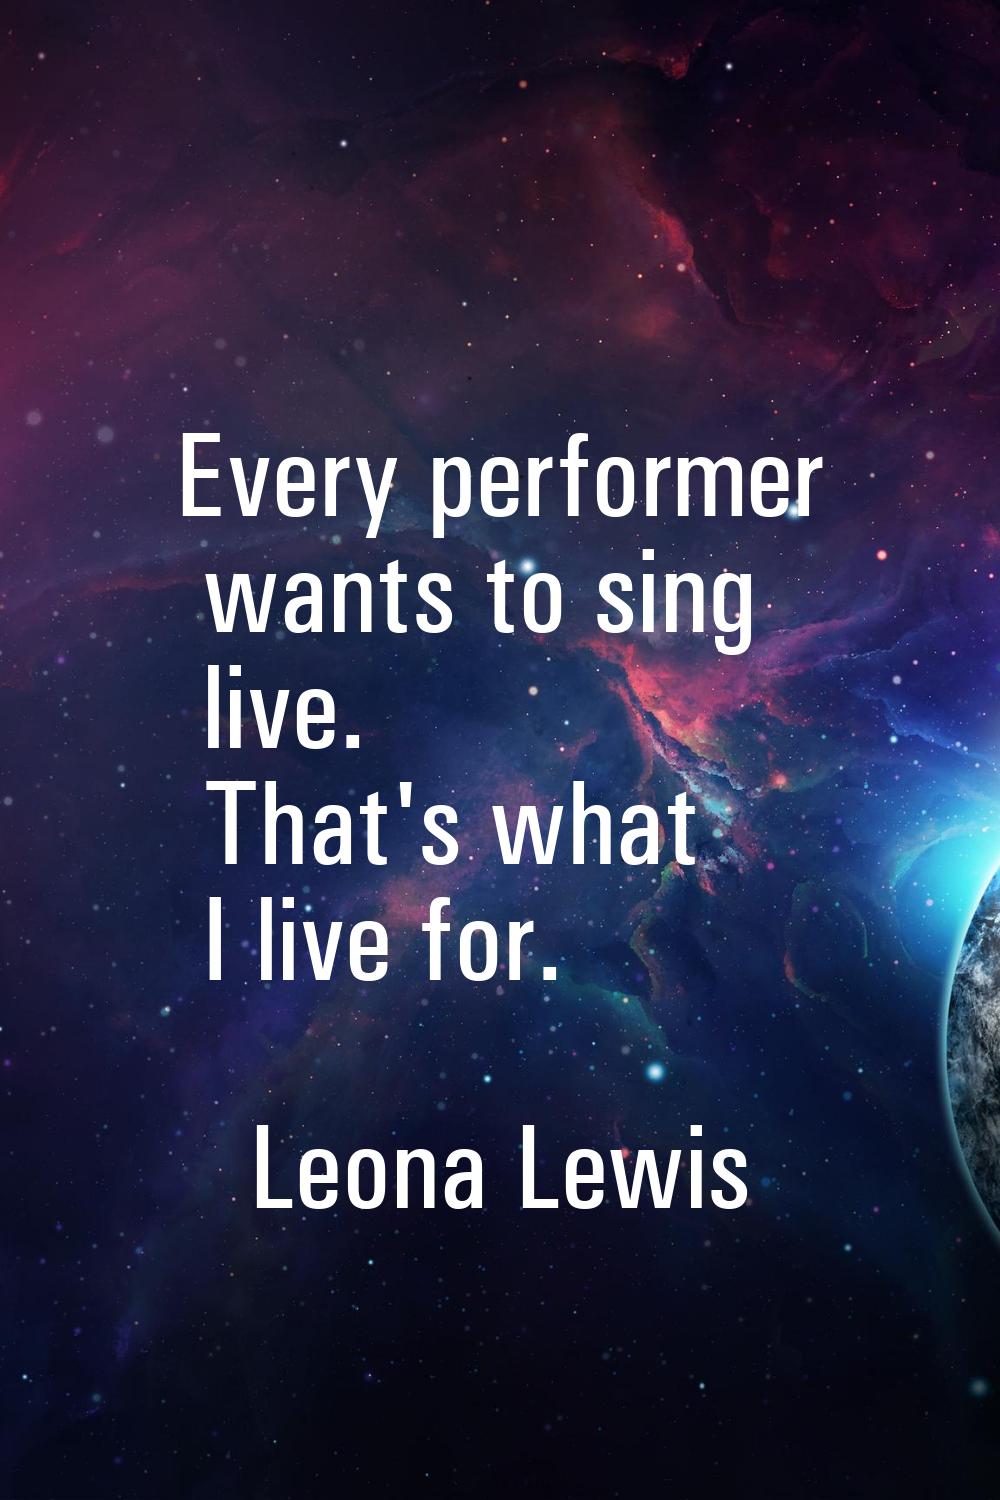 Every performer wants to sing live. That's what I live for.